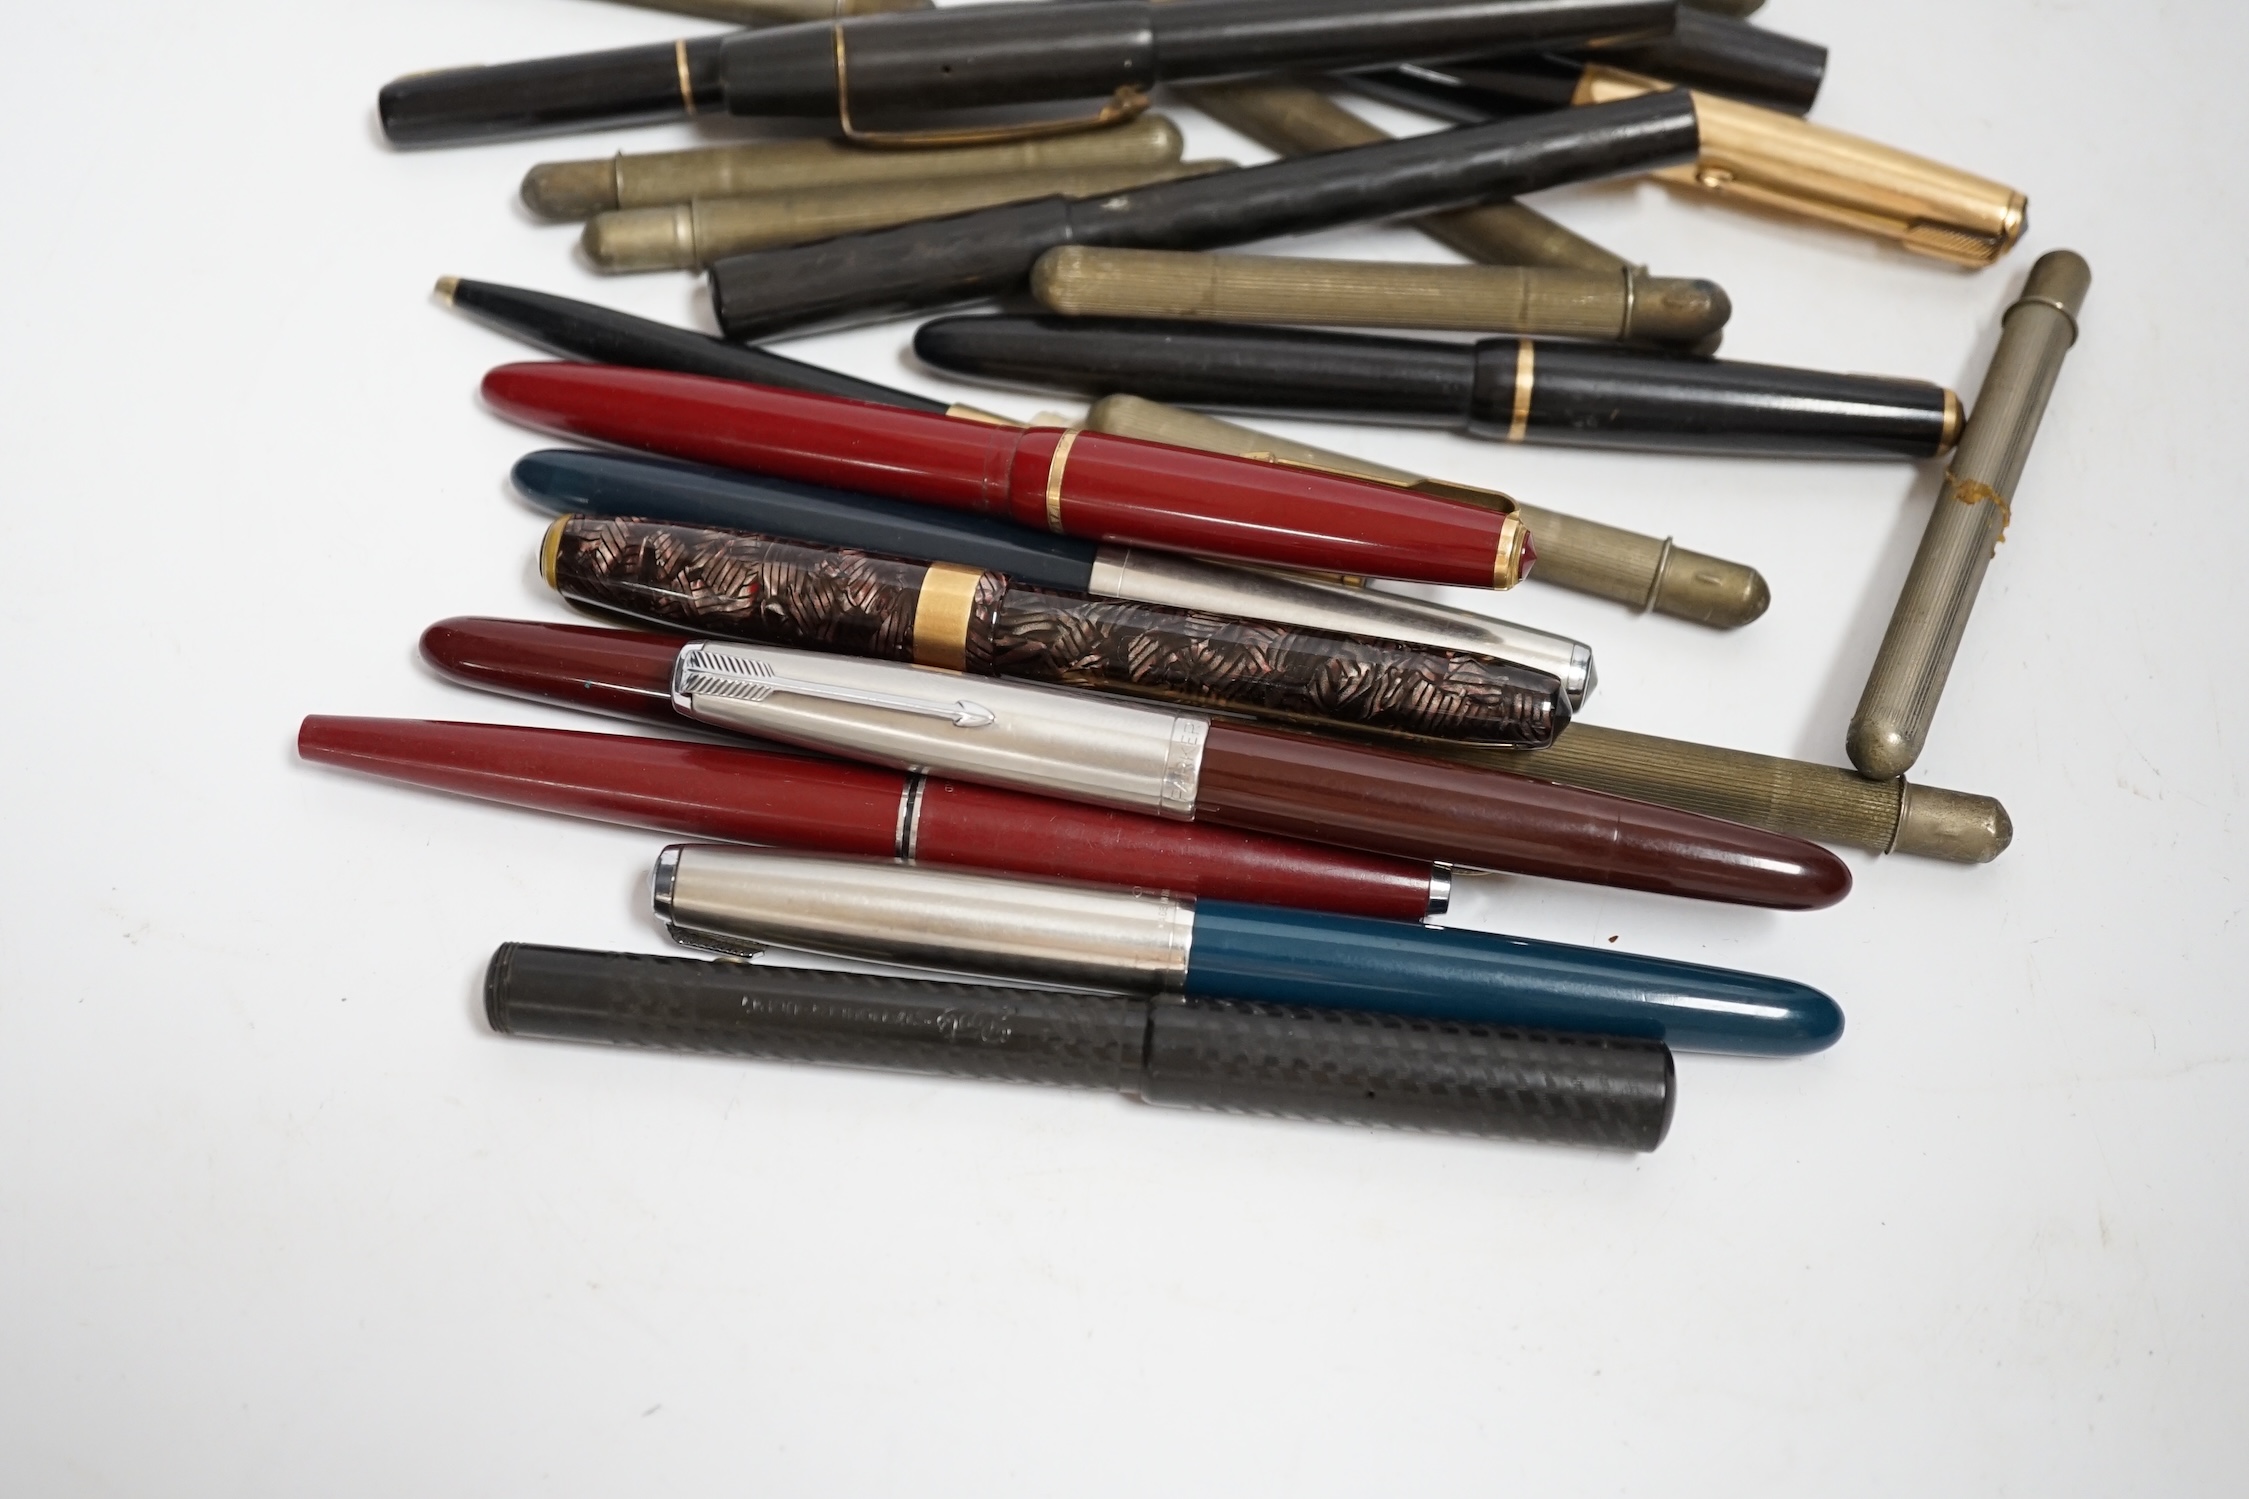 A quantity of fountain pens including Parker. Some with 14k gold nibs